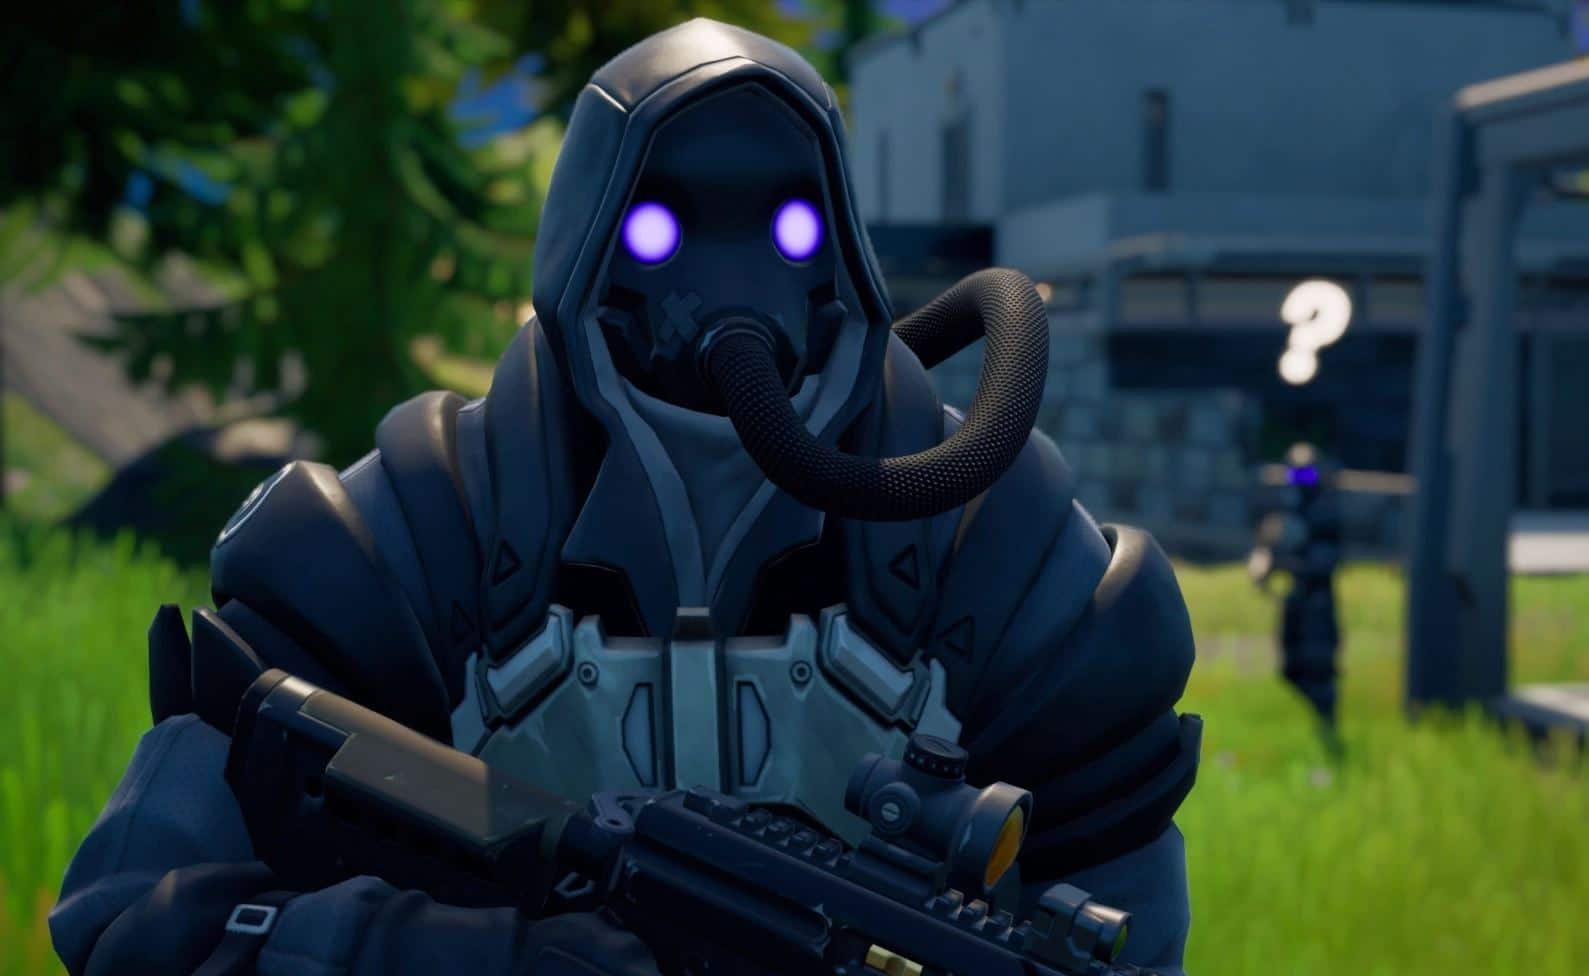 Season 5 of the 2nd Chapter of Fortnite is well into completing 9 weeks. 